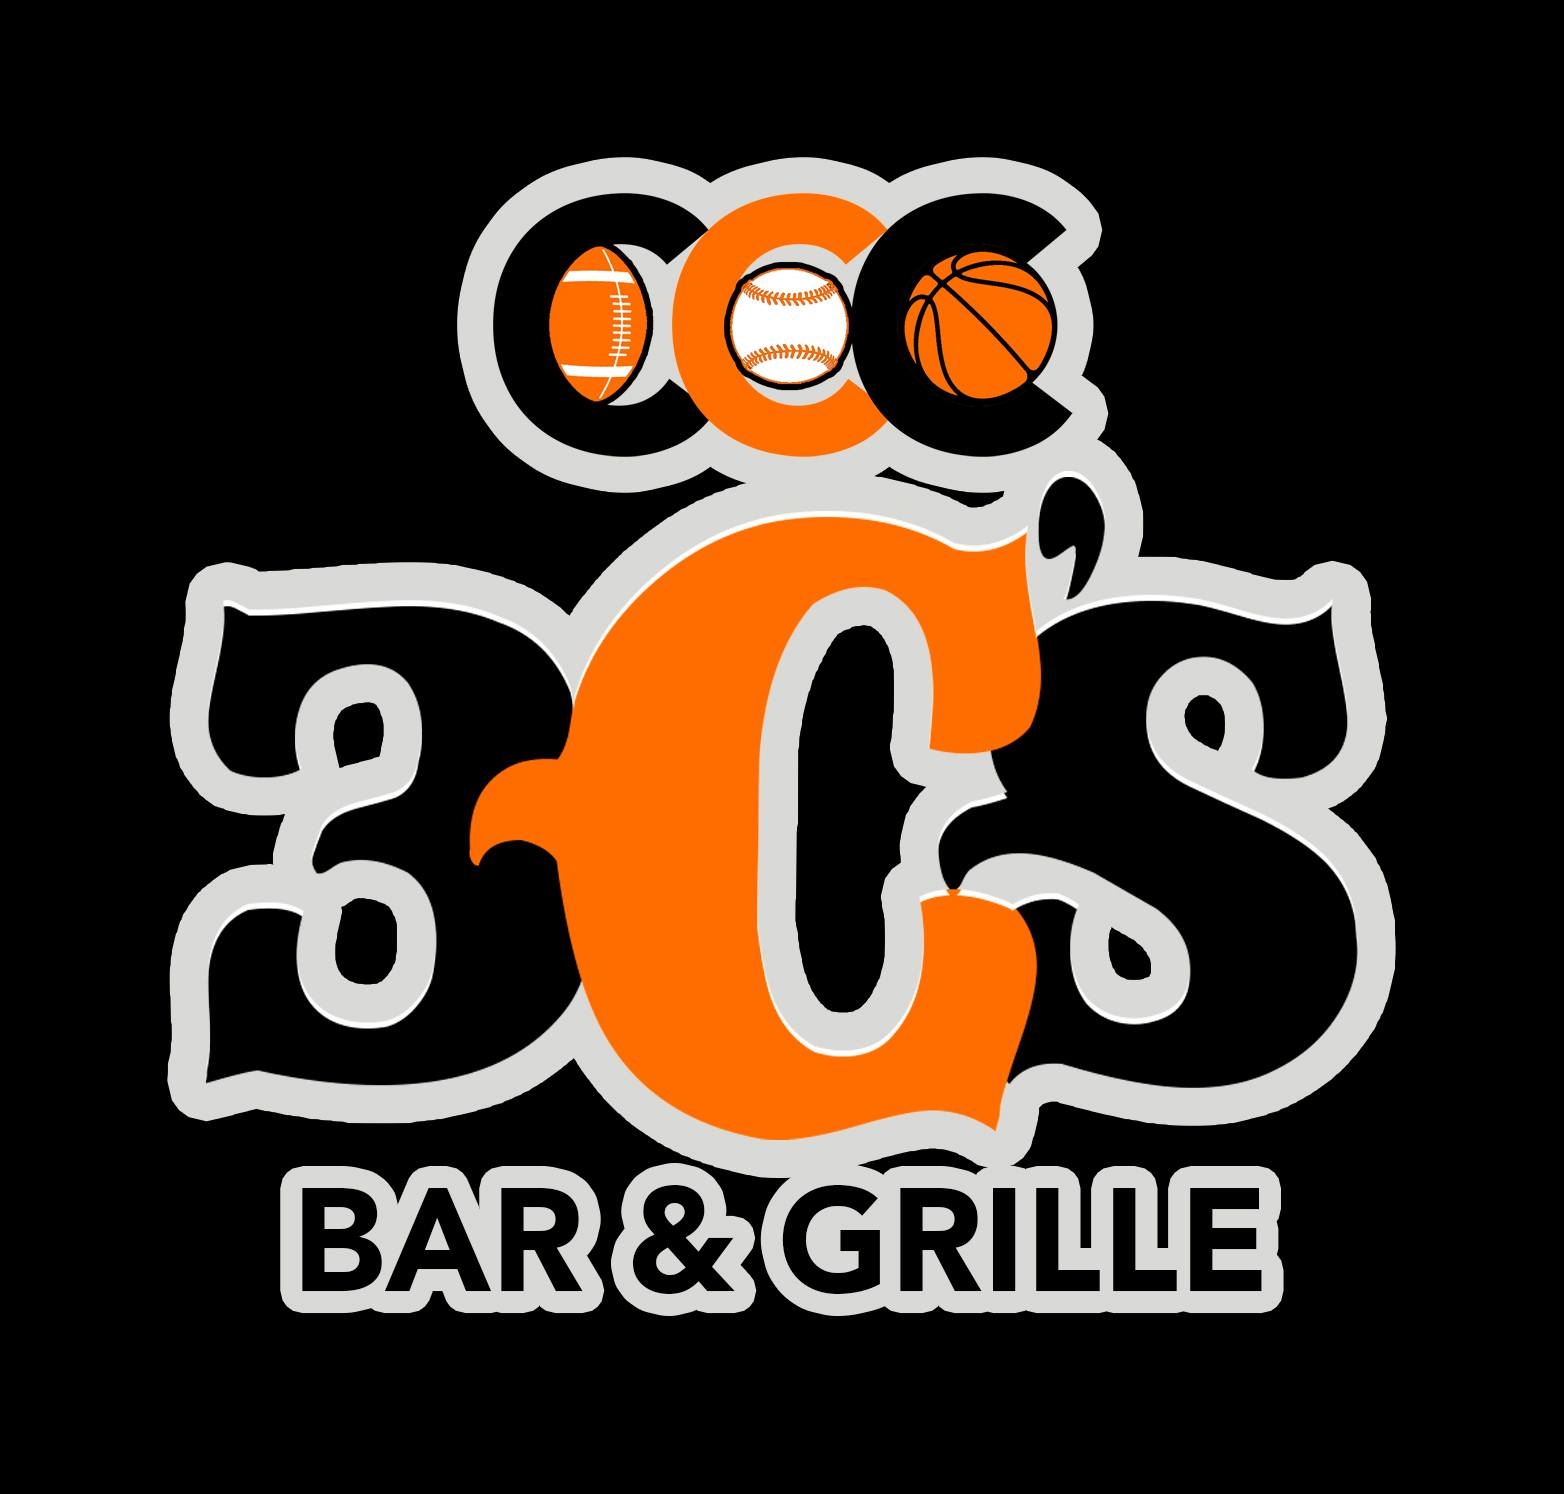 3 C's Bar & Grille